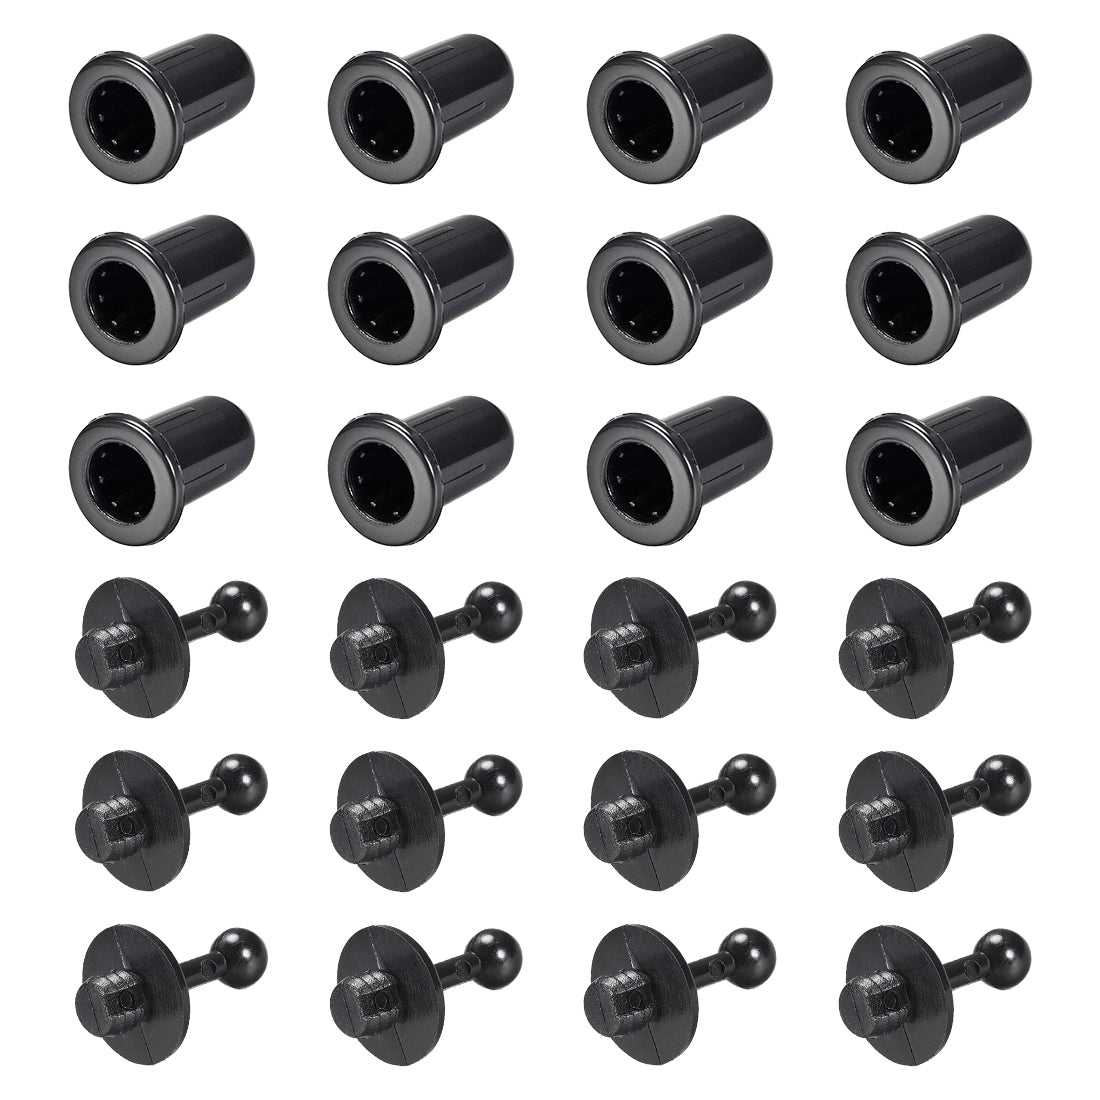 uxcell Uxcell Speaker Small Peg Kit Guides 25.5mm Black Dia 6mm 12 Pairs